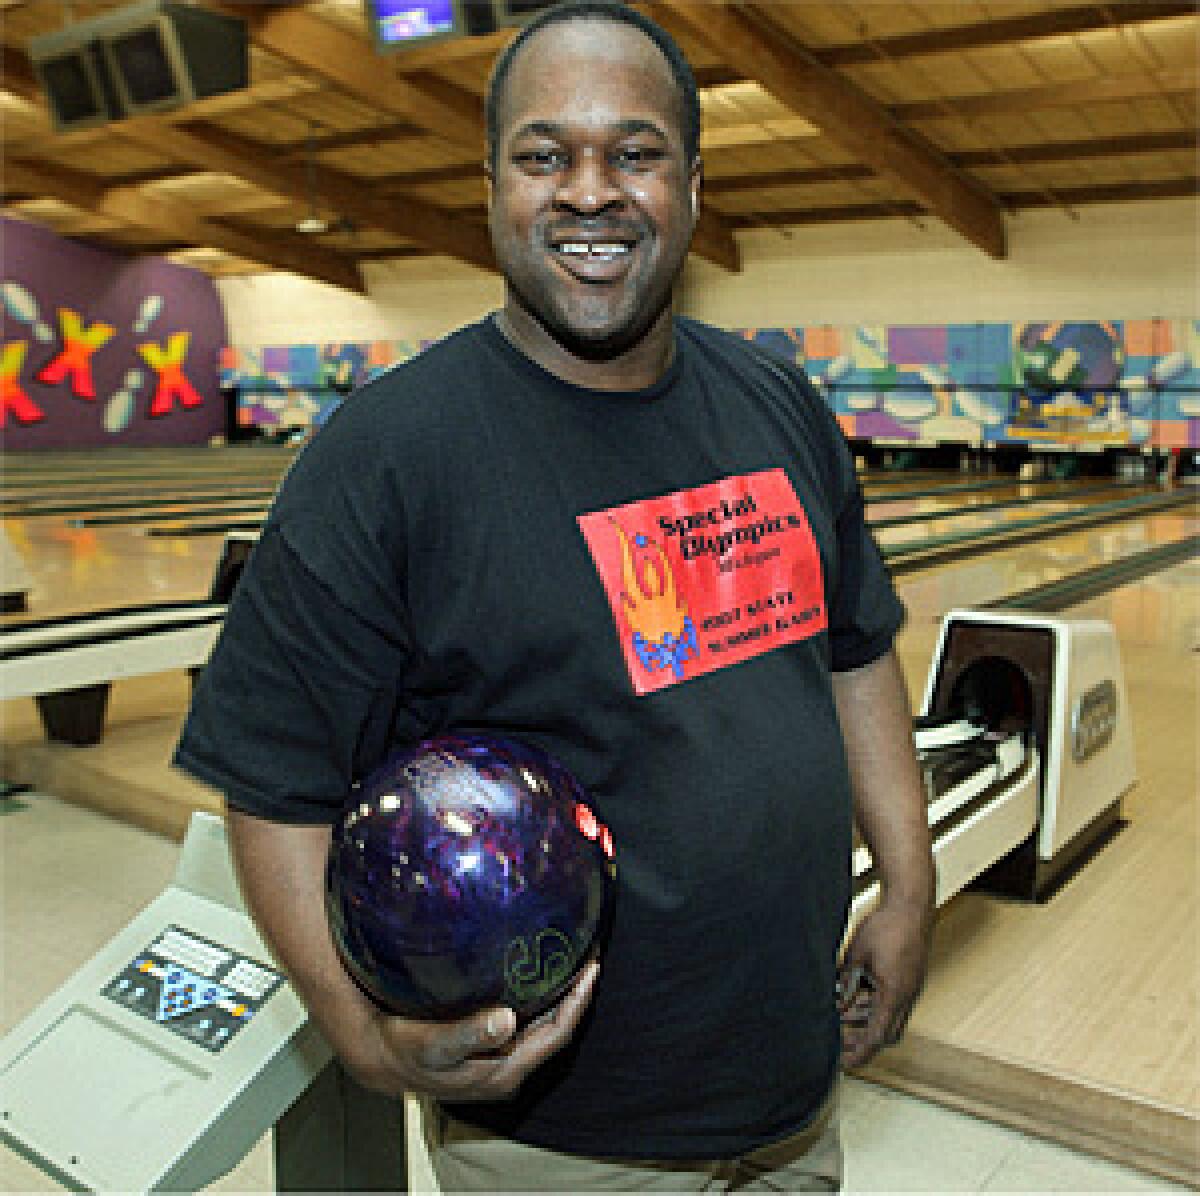 Kolan McConiughey, who is cognitively impaired, has bowled five perfect games since 2005.